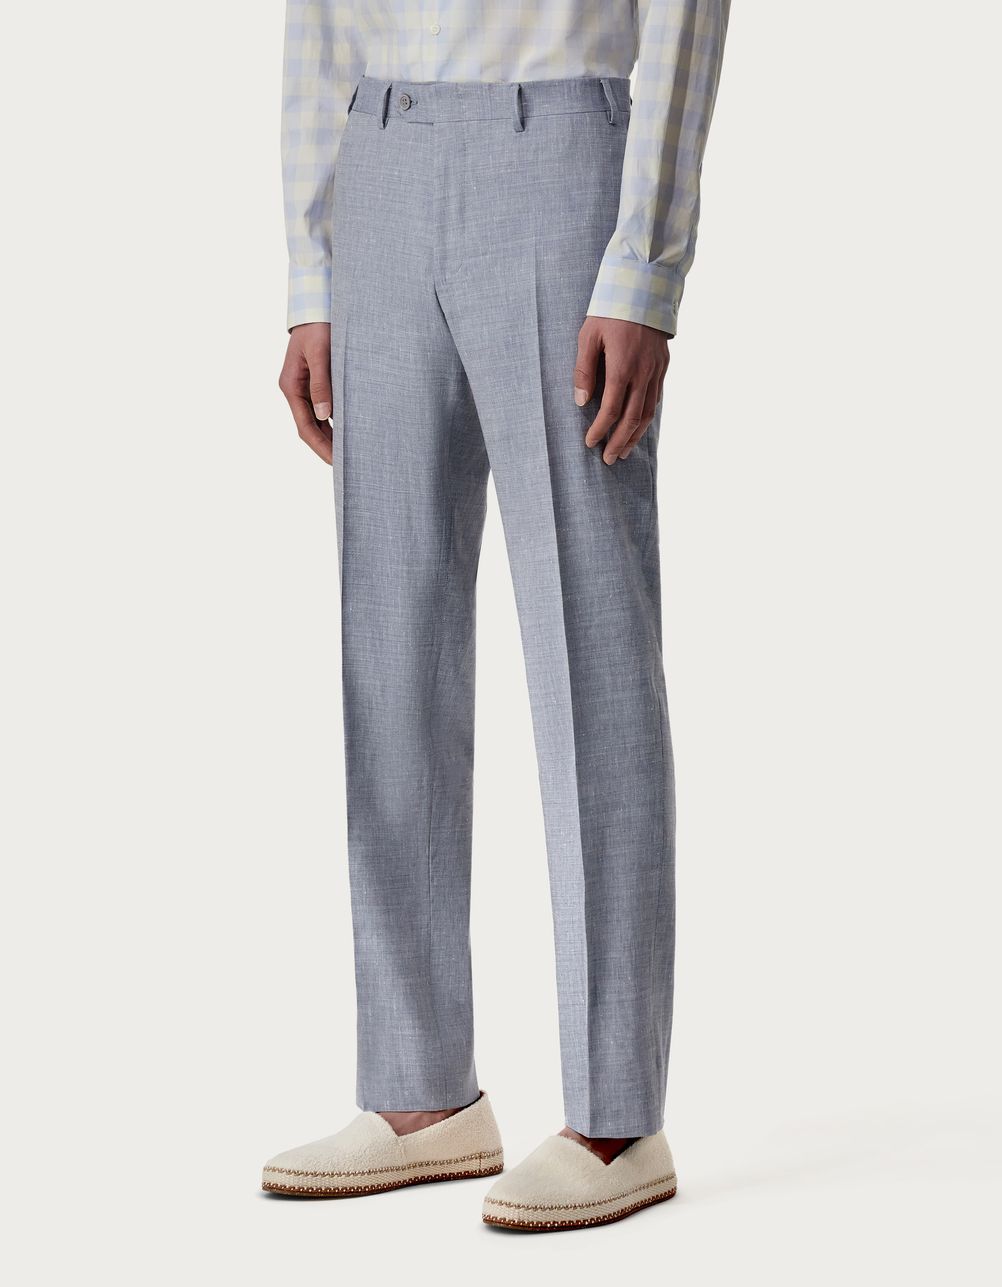 Light blue pants in linen and wool